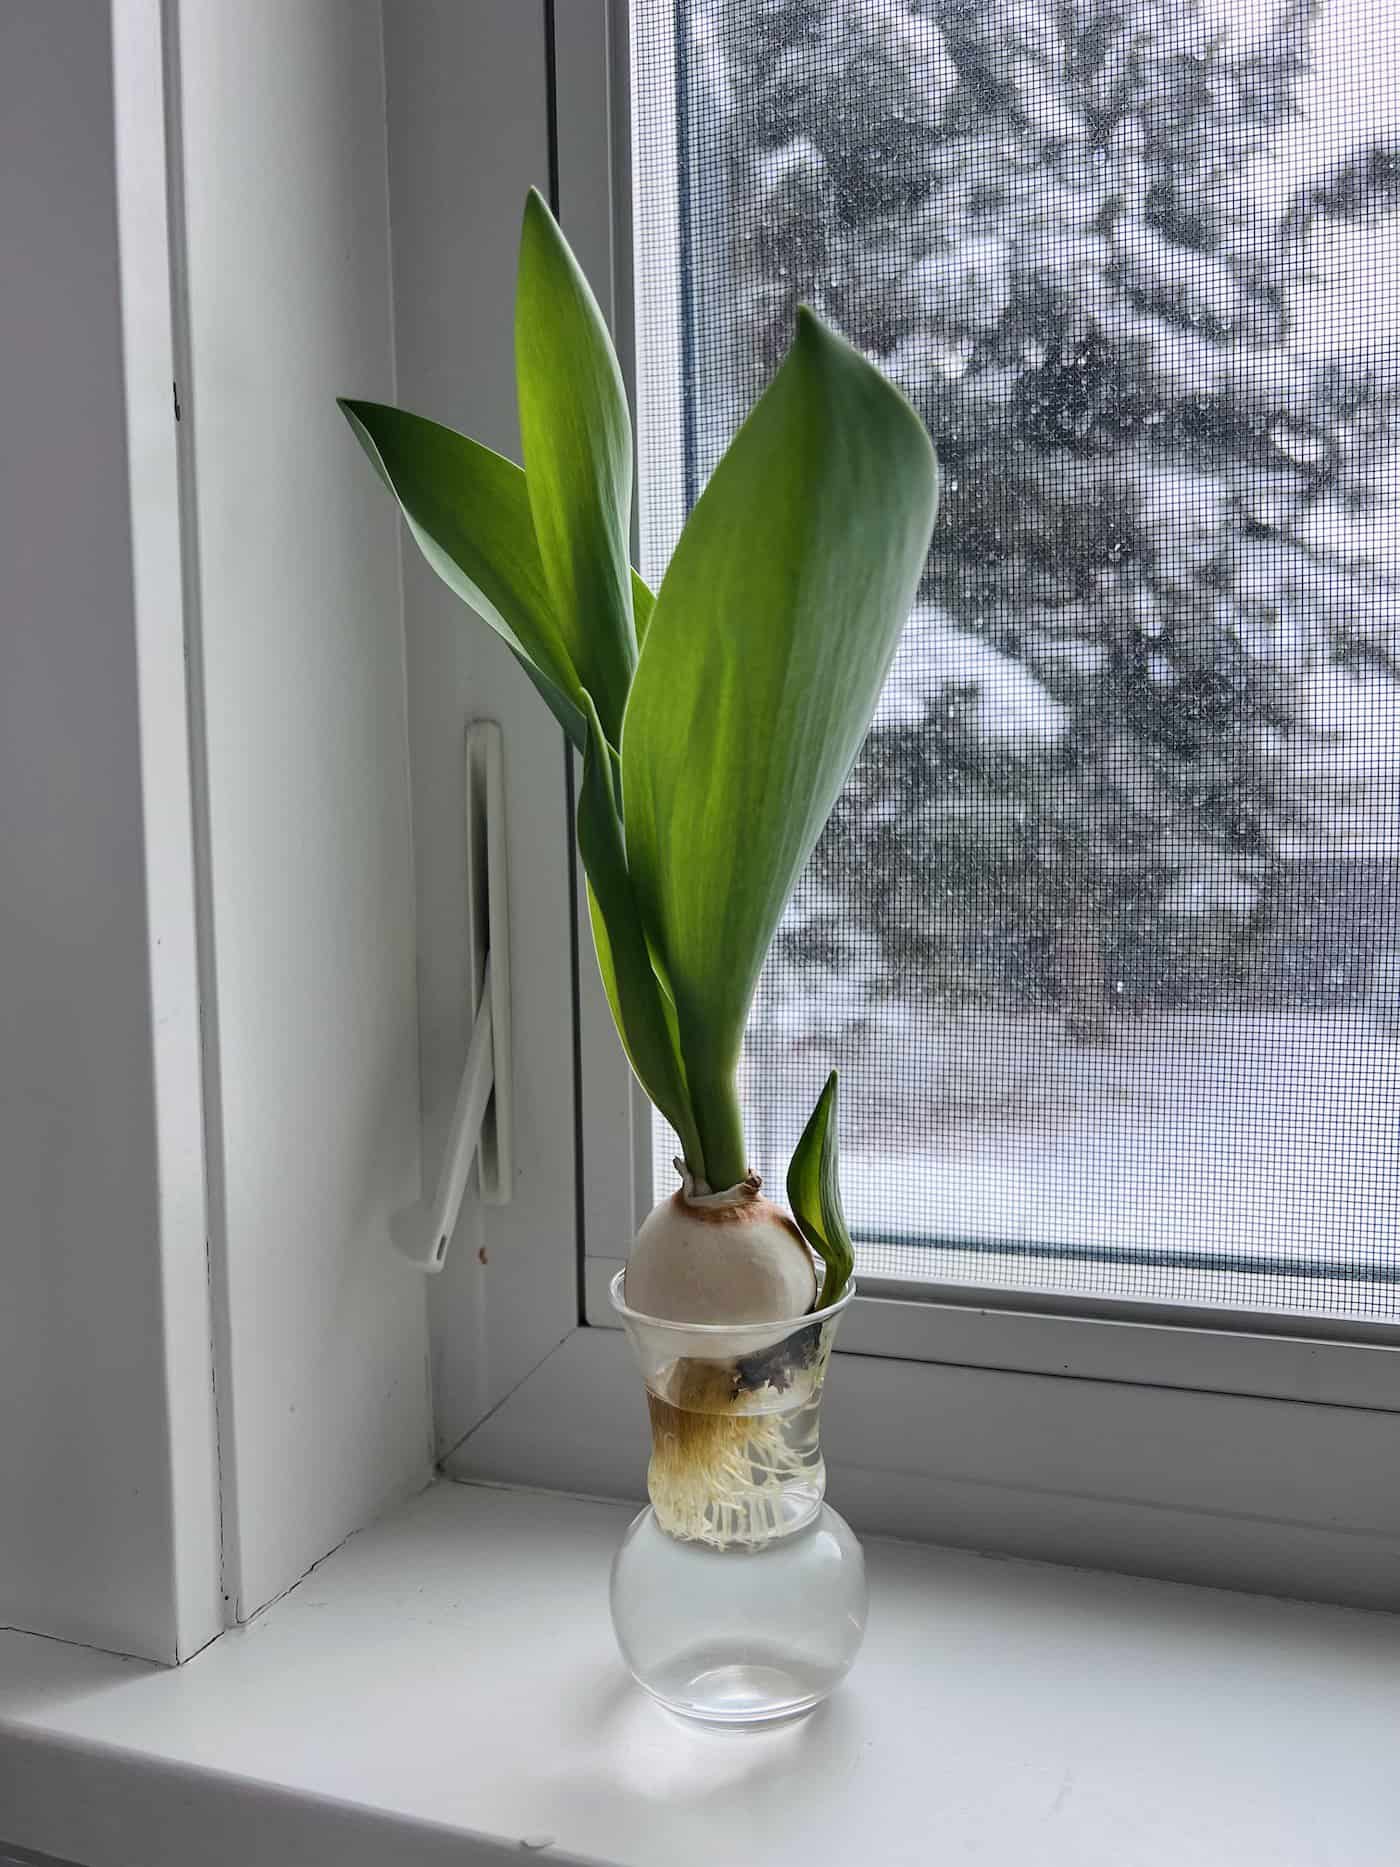 Bulb forcing in clear vase on windowsill